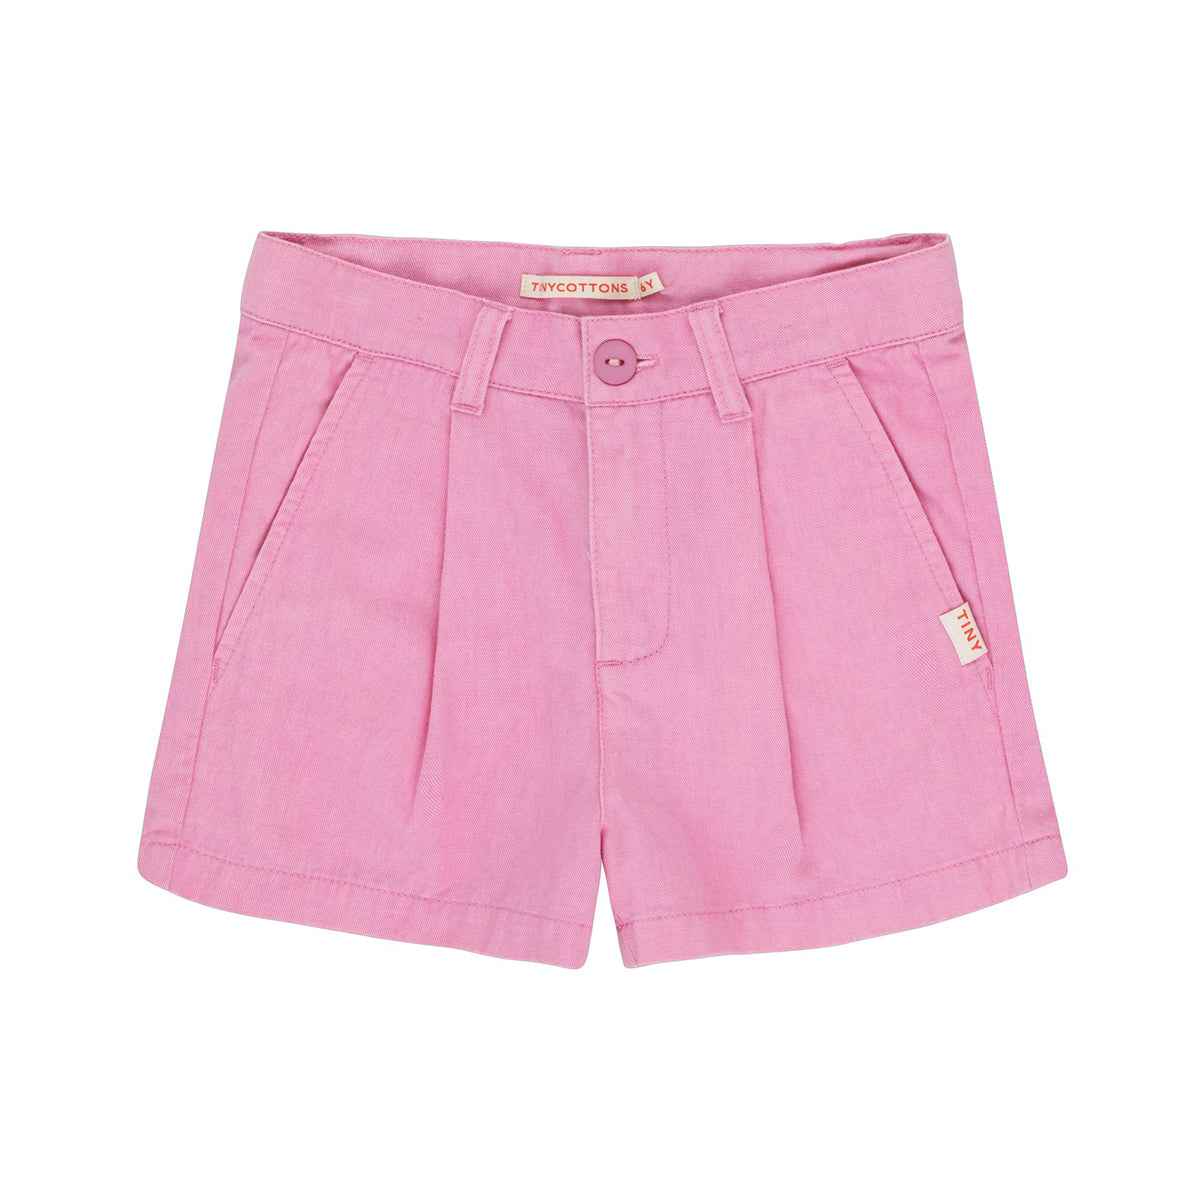 tinycottons-tiny-cottons-pleated-shorts